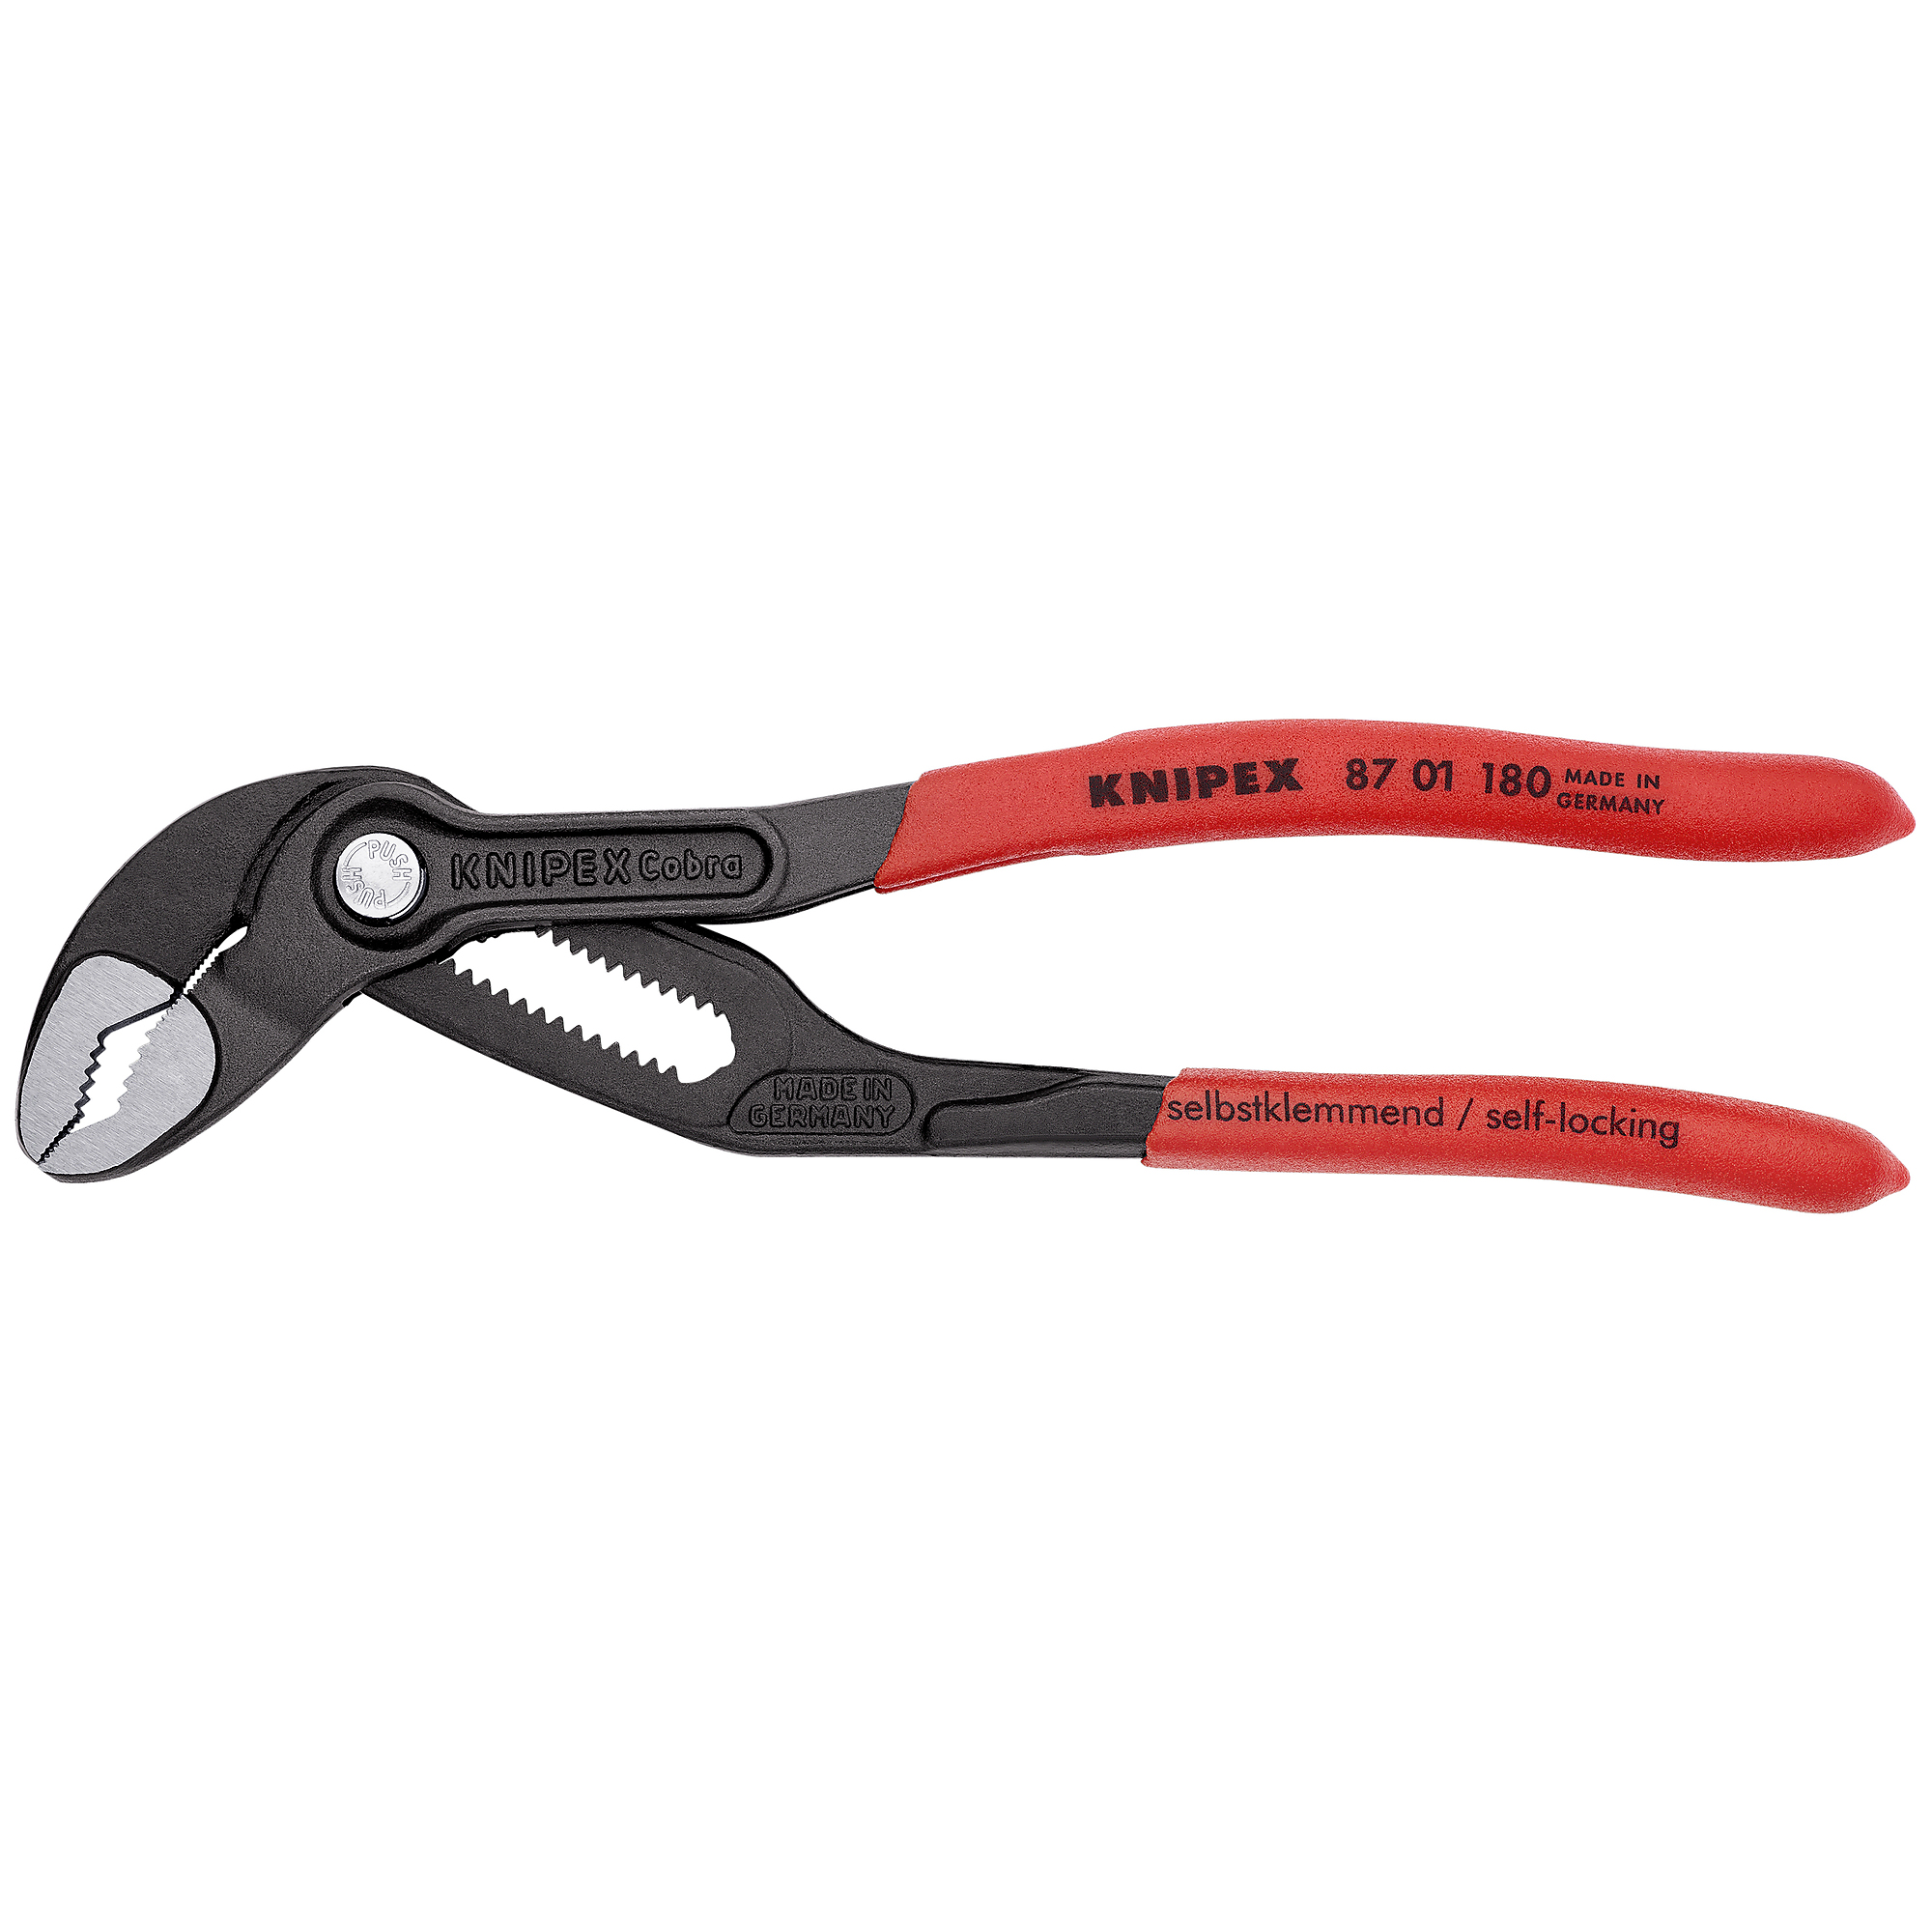 KNIPEX Cobra , Cobra Water Pump Pliers, Non-slip plastic, 7.25Inch, Pieces (qty.) 1 Material Steel, Jaw Capacity 1.5 in, Model 87 01 180 SBA